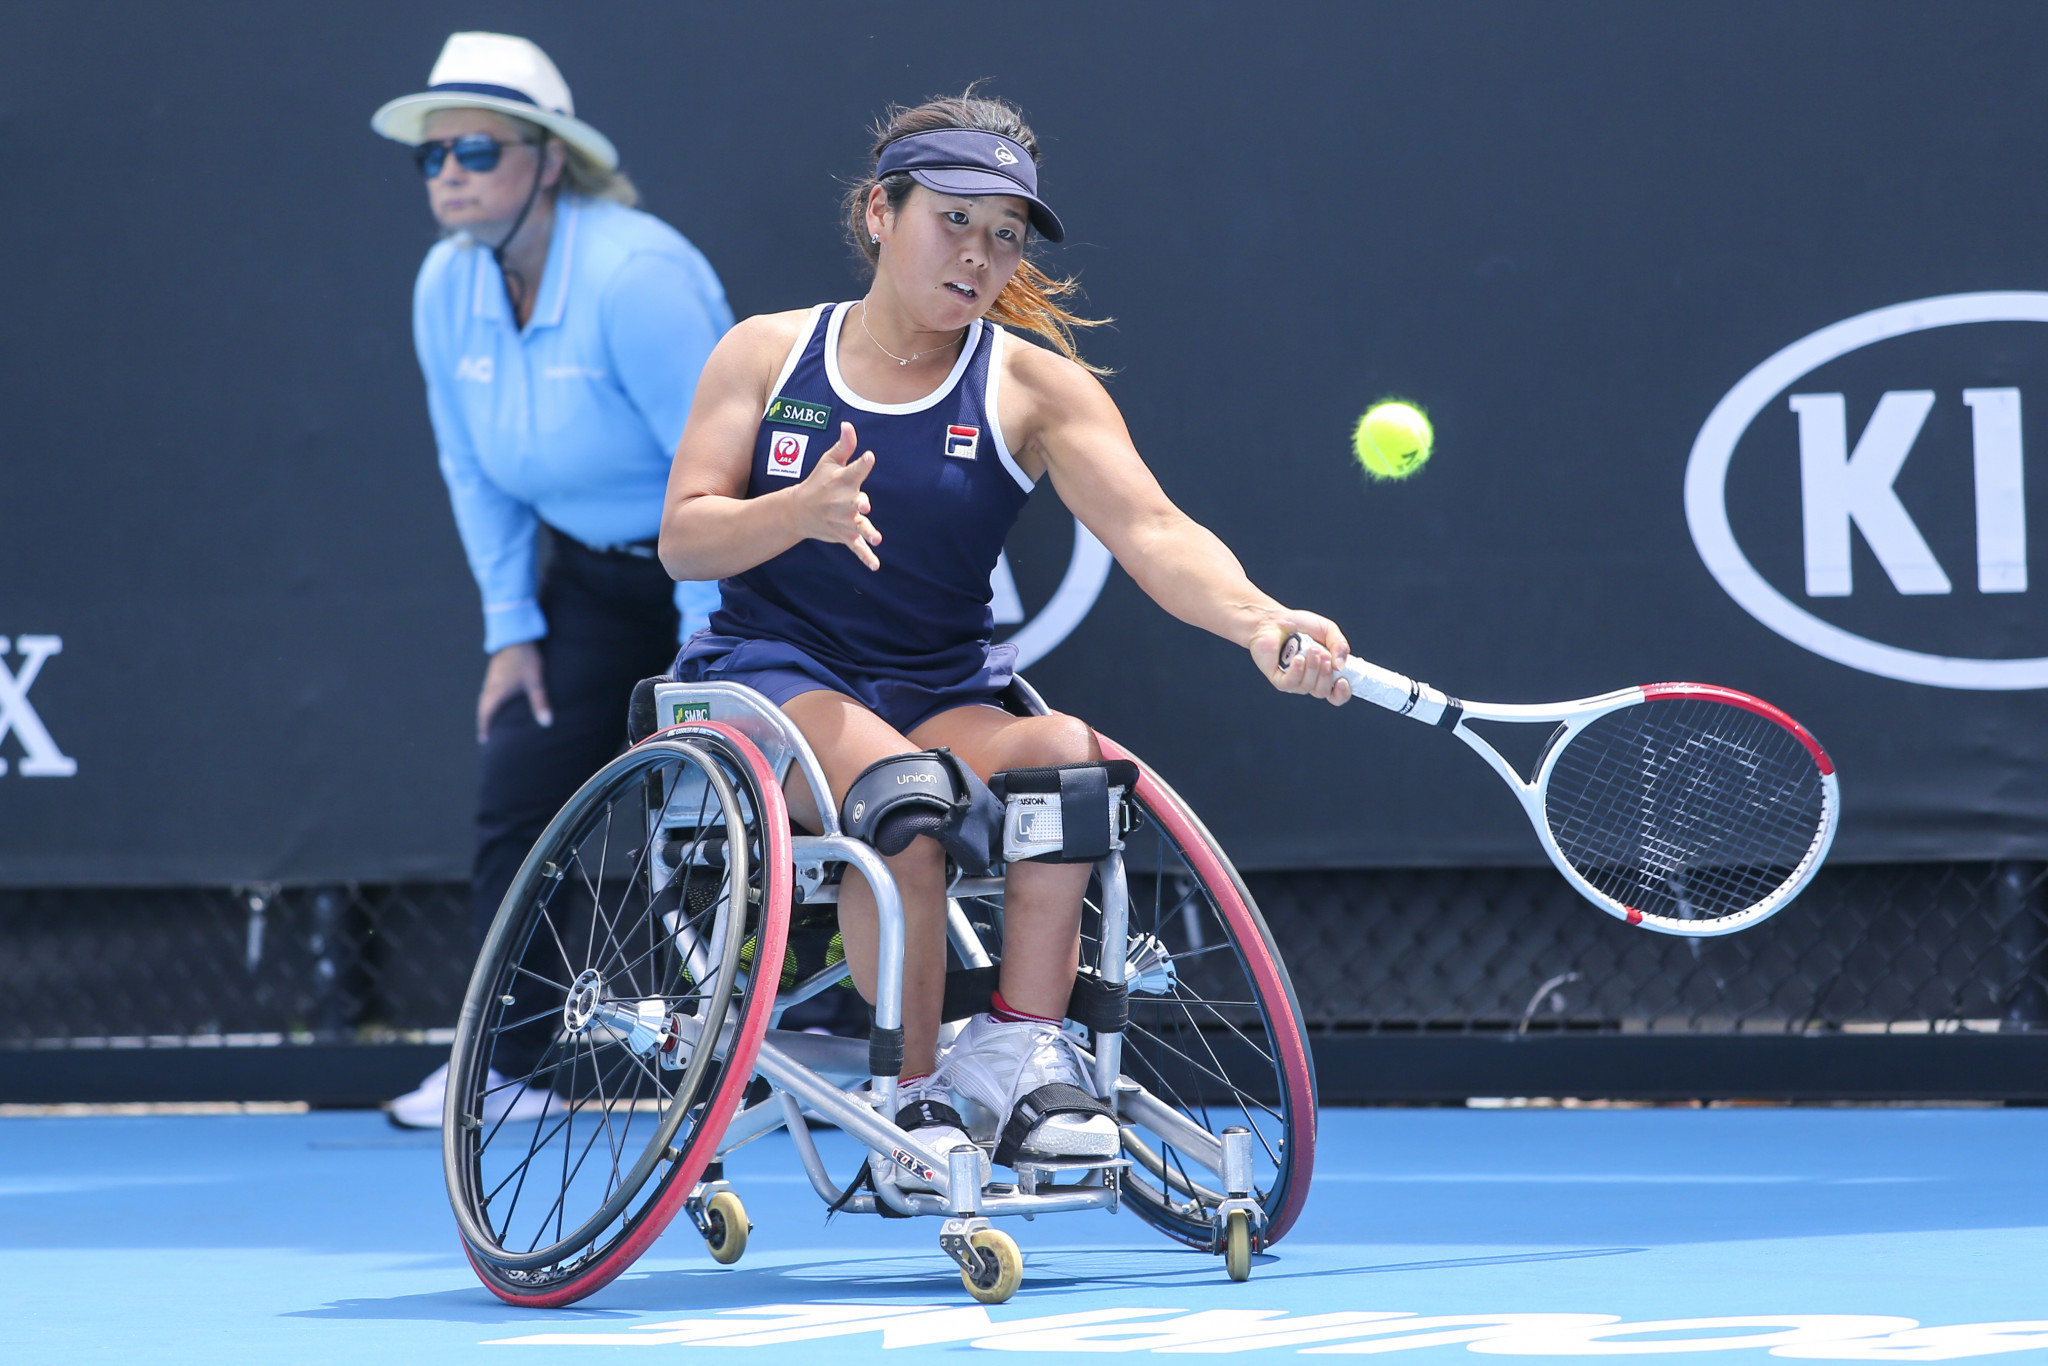 Yui Kamiji completed a Japanese double with victory in the women's singles final ©Getty Images